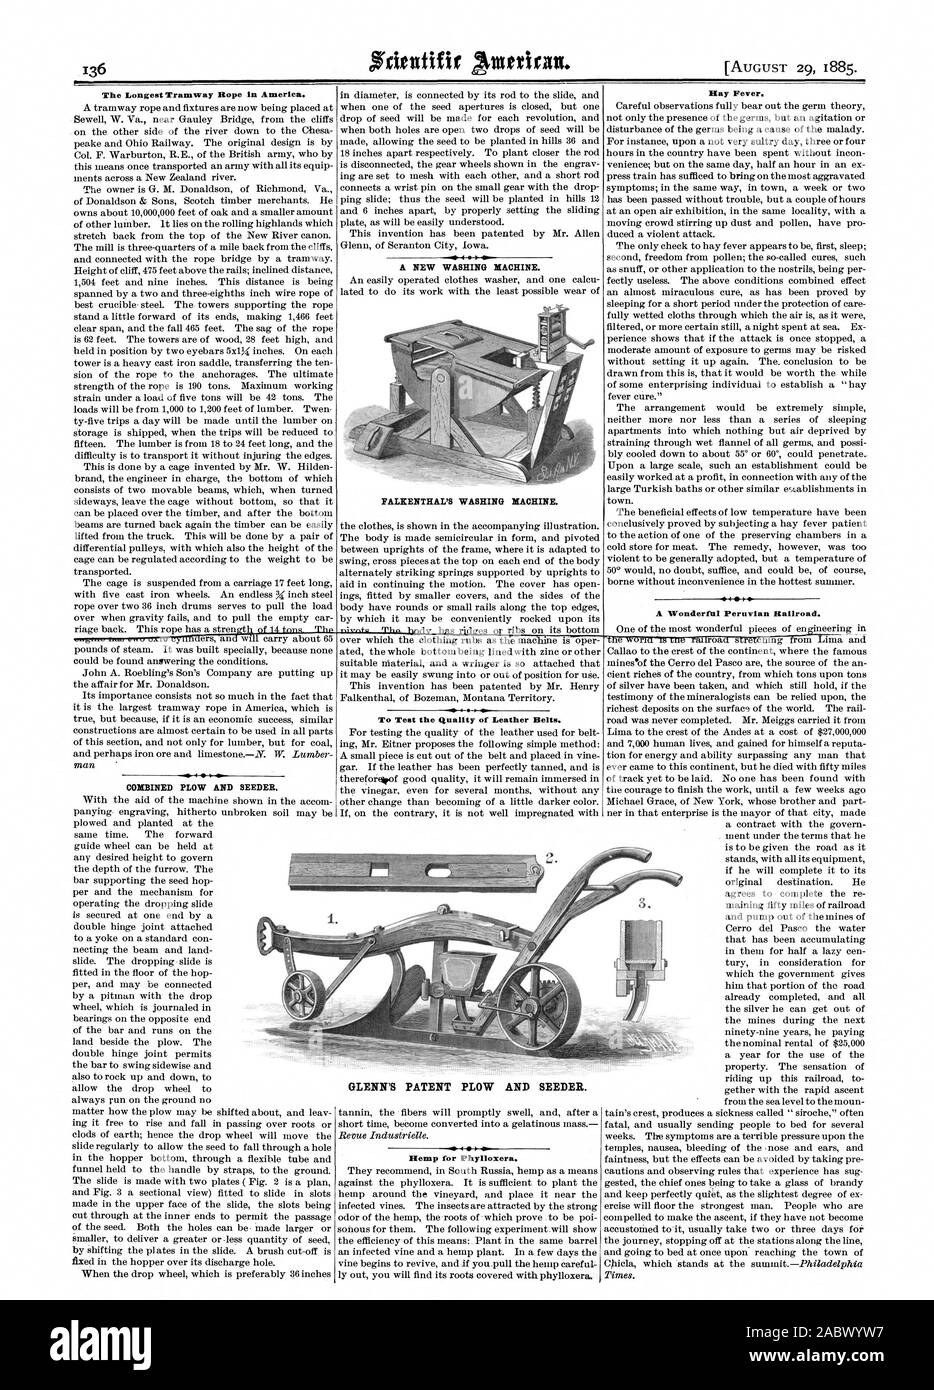 The Longest Tramway Rope in America. COMBINED PLOW AND SEEDER. A NEW WASHING MACHINE. FALICENTHAVS WASHING MACHINE. To Test the Quality of Leather Belts. Hemp for Phylloxera. Hay Fever. A 'Wonderful Peruvian Railroad. S. GLENN'S PATENT PLOW AND SEEDER., scientific american, 1885-08-29 Stock Photo